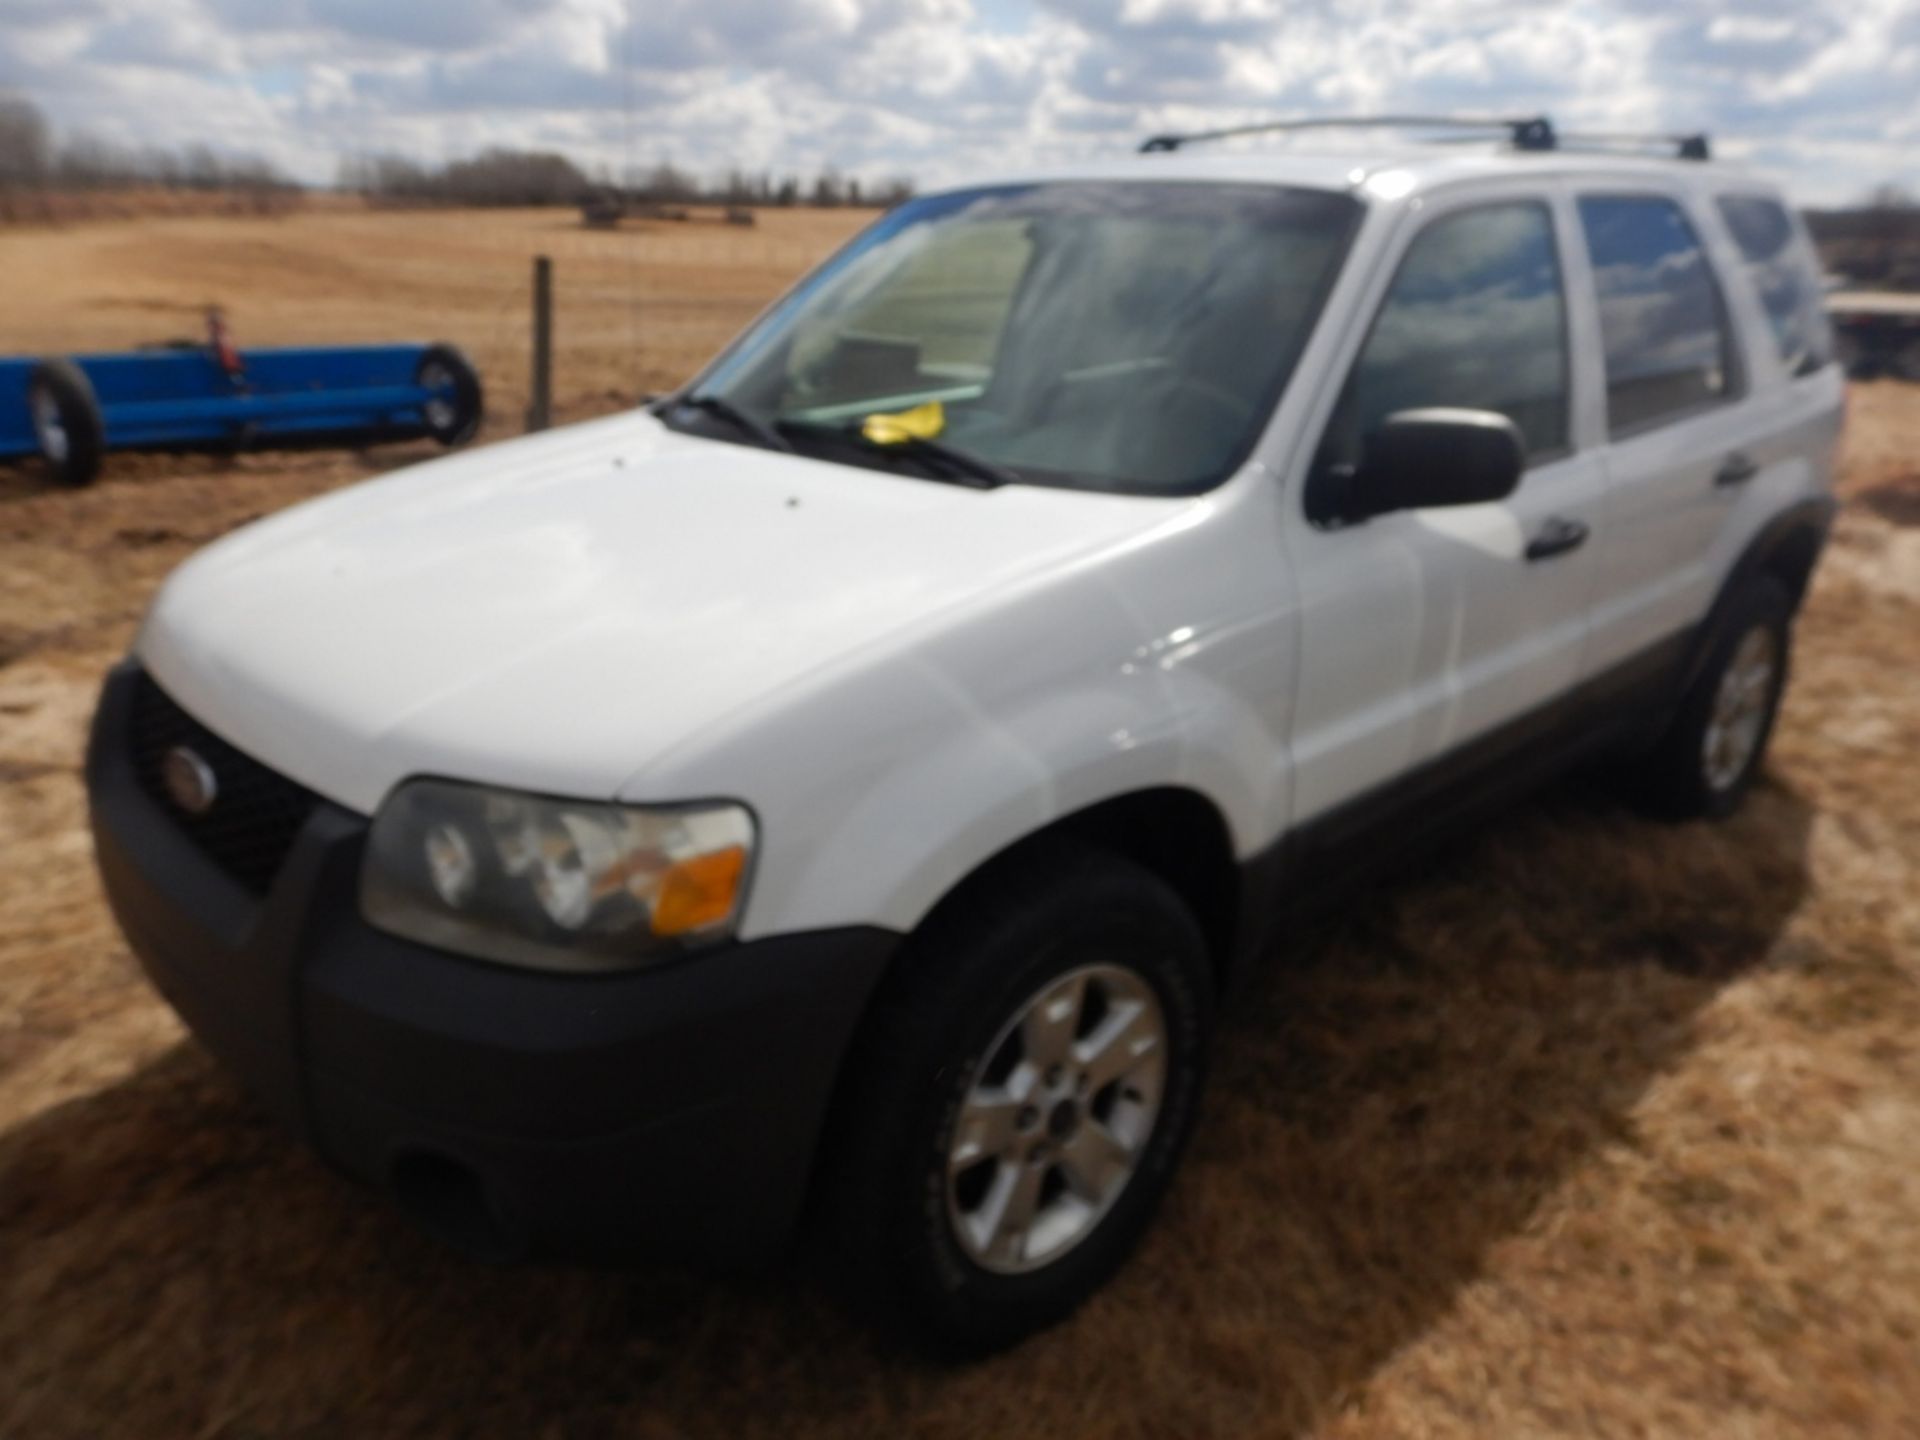 2005 FORD ESCAPE XLT, AWD, 3.0L V6, AUTOMATIC, POWER WINDOW, POWER DOOR LOCKS, 269,904 KM'S SHOWING,